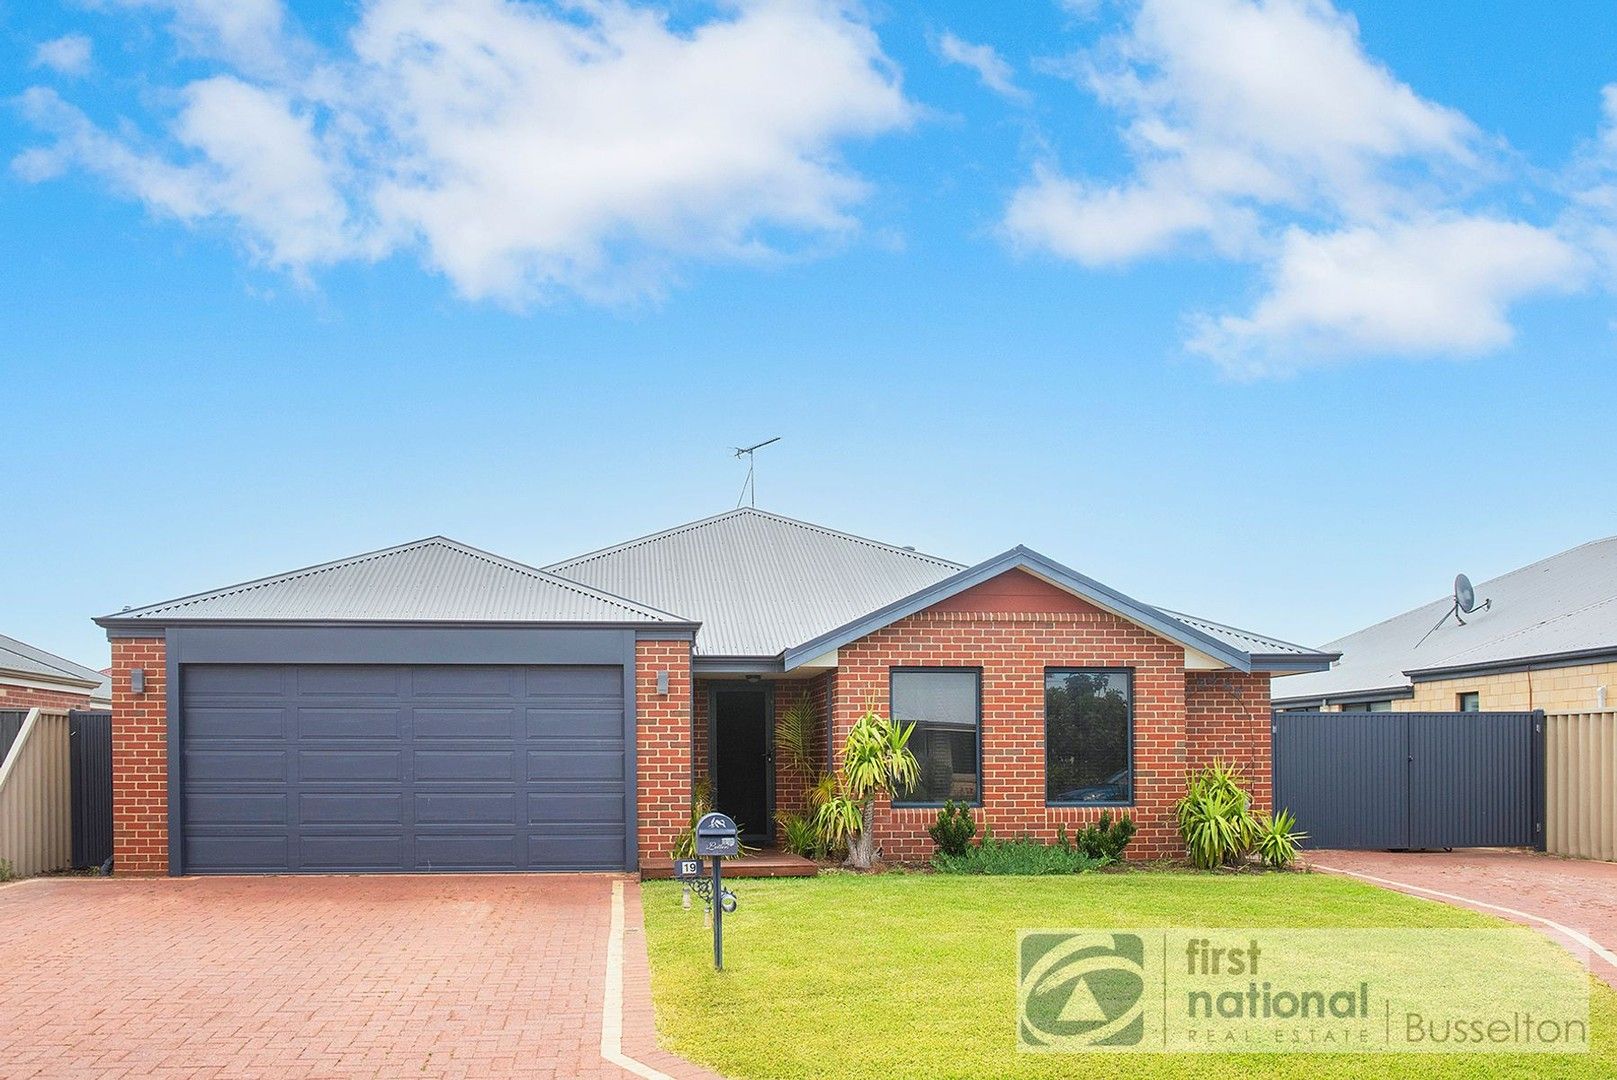 4 bedrooms House in 19 Sparrow Crescent BROADWATER WA, 6280